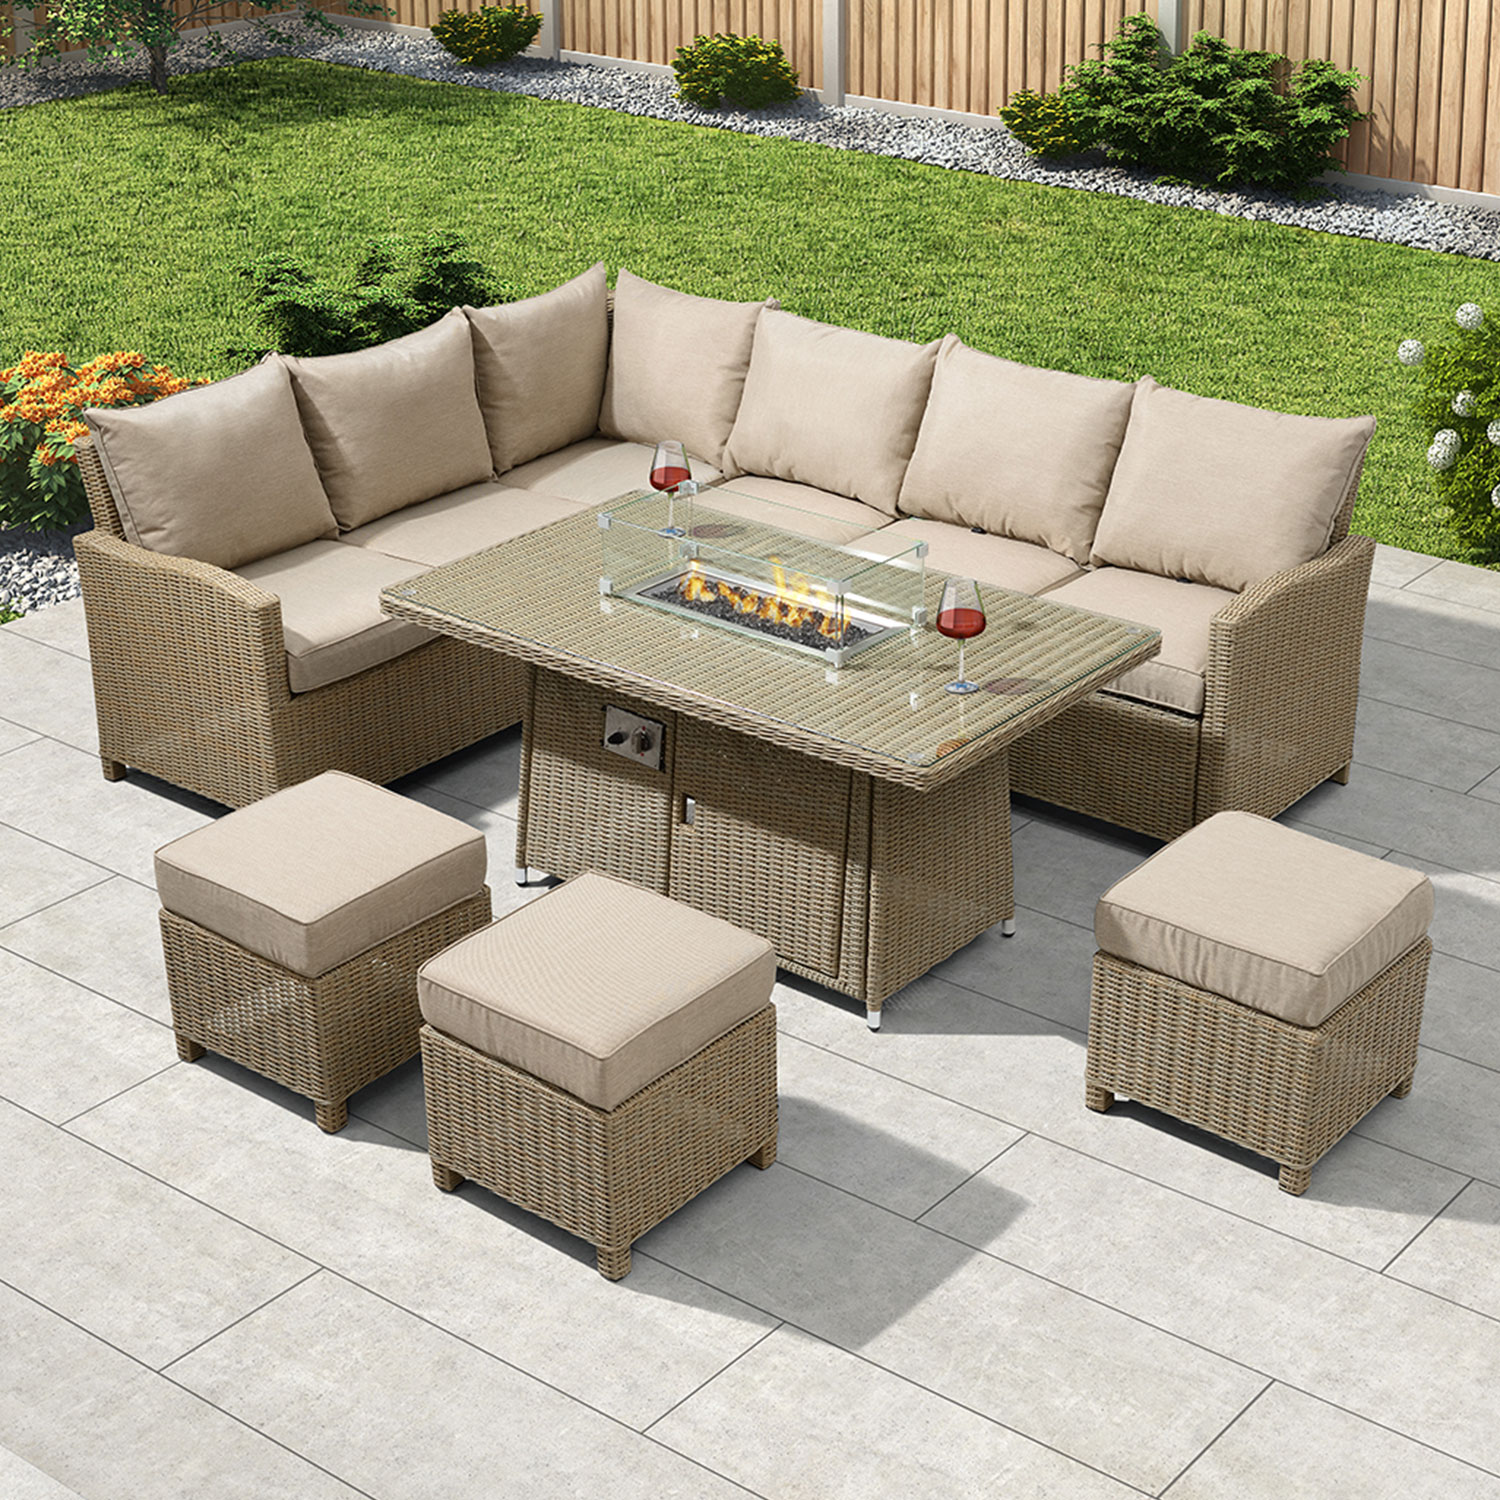 Nova Heritage Ciara Corner Dining Set, Outdoor Furniture With Fire Pit Coffee Table